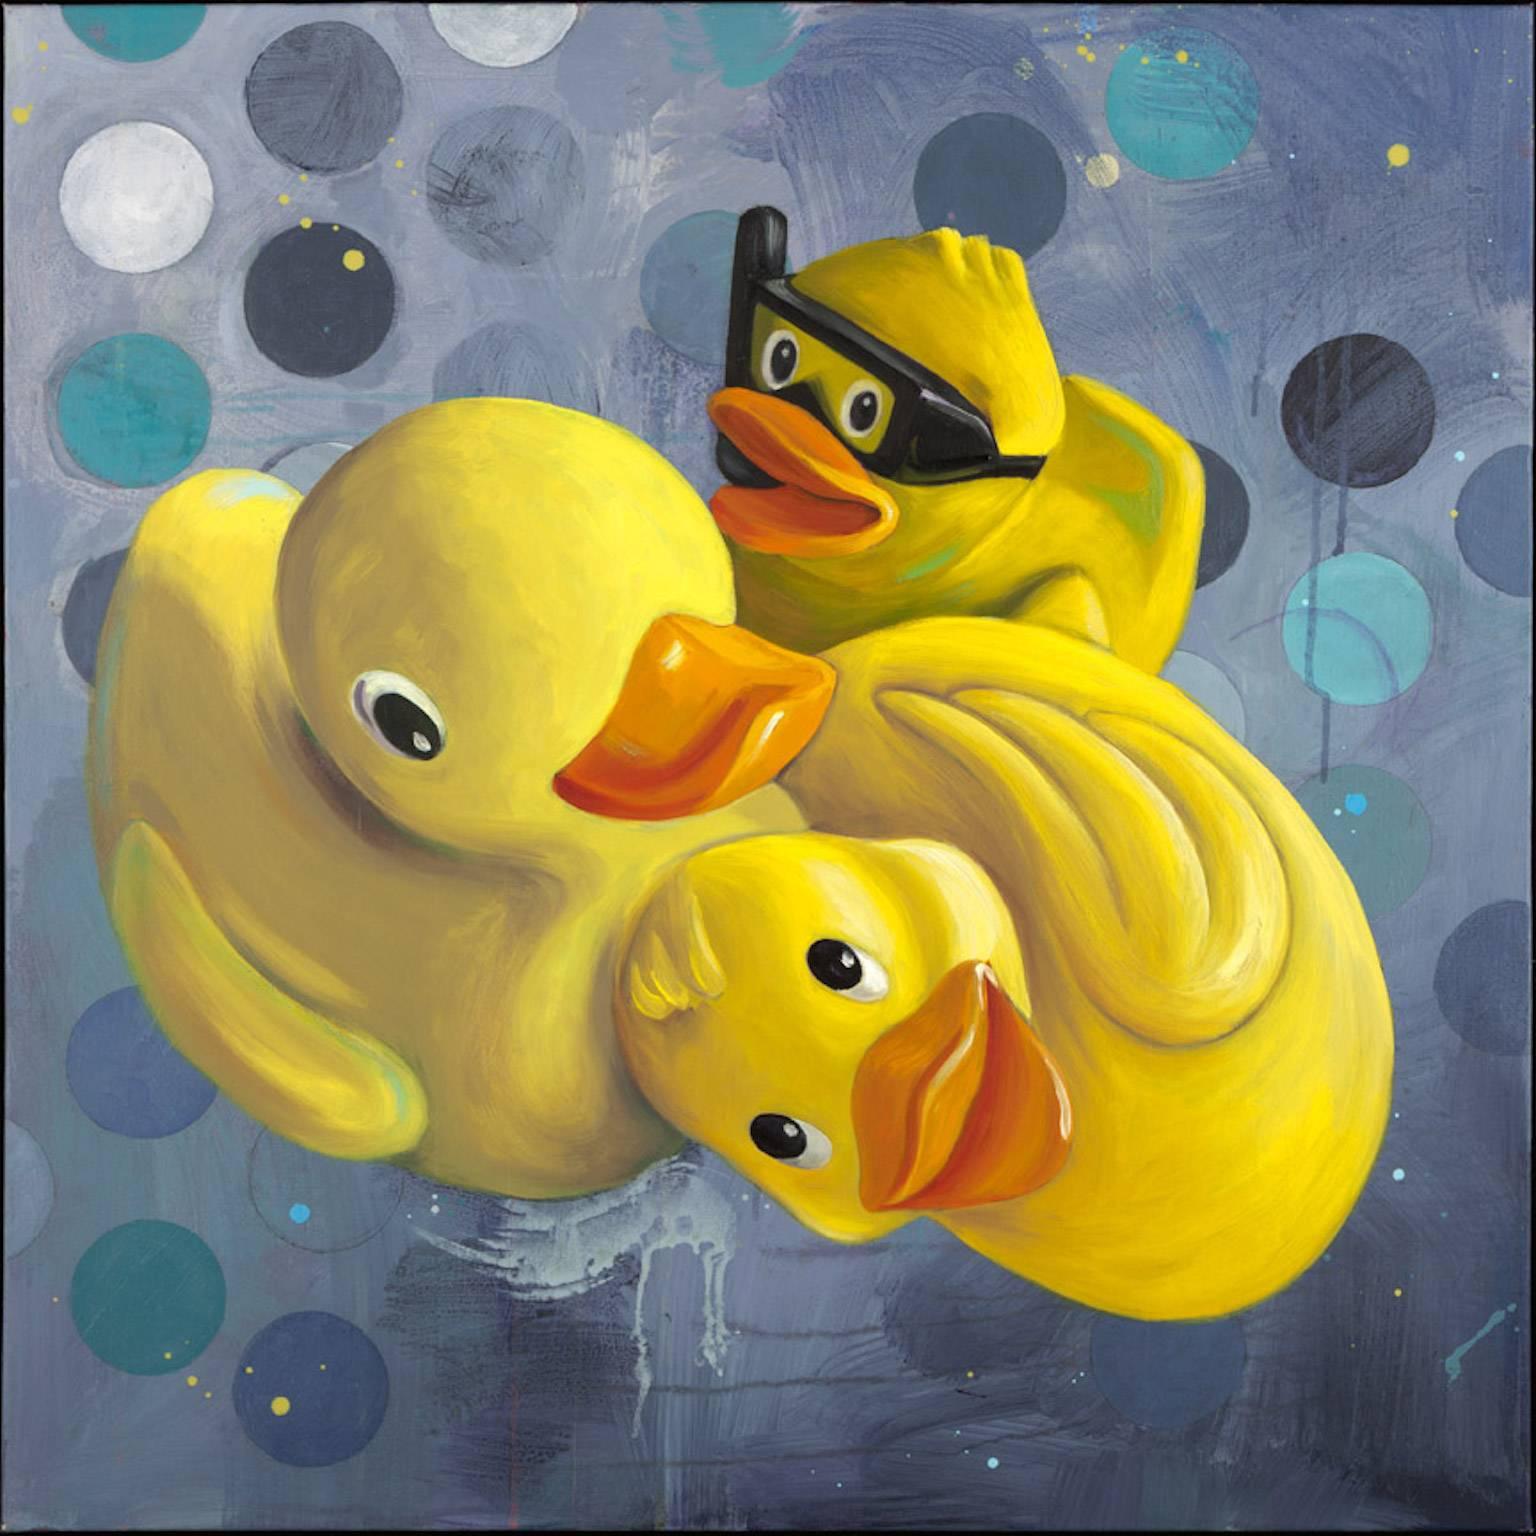 "Pile Up", contemporary, toy, ducks, yellow, grey, blue, acrylic, oil painting - Mixed Media Art by Anne Sargent Walker